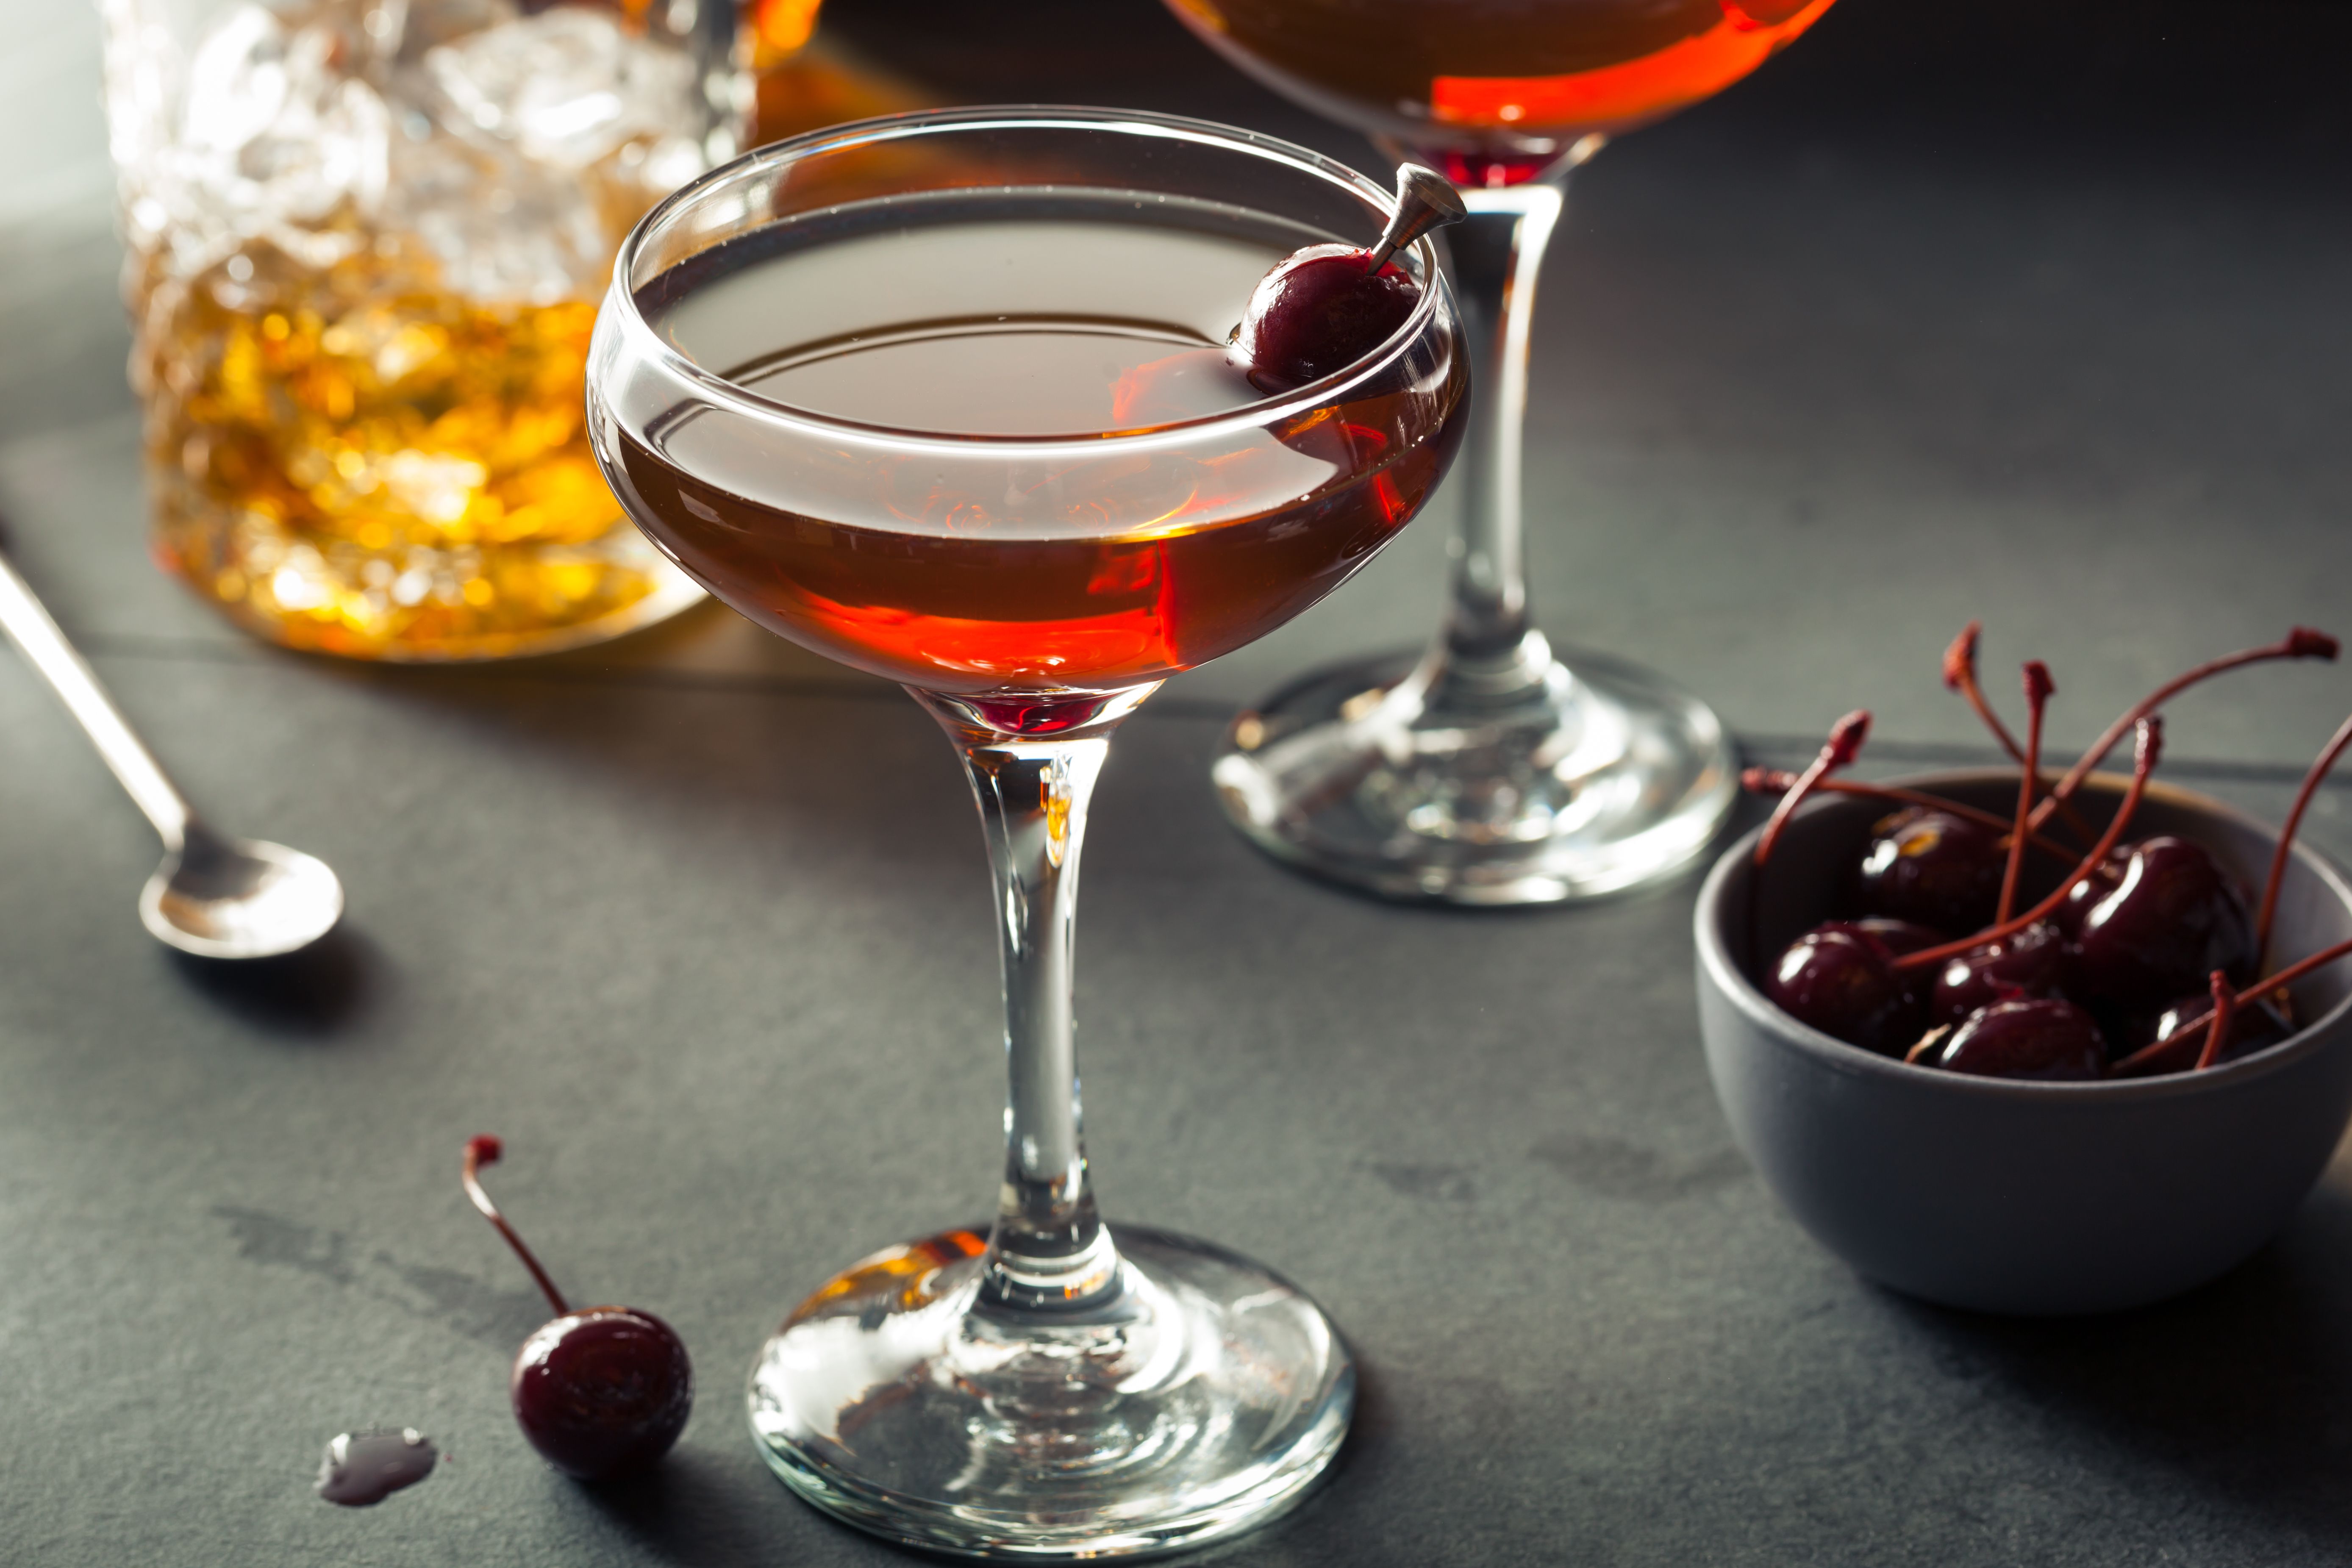 As we prepare to celebrate Crystal Serenity's arrival in NYC, why not try our signature Manhattan cocktail?